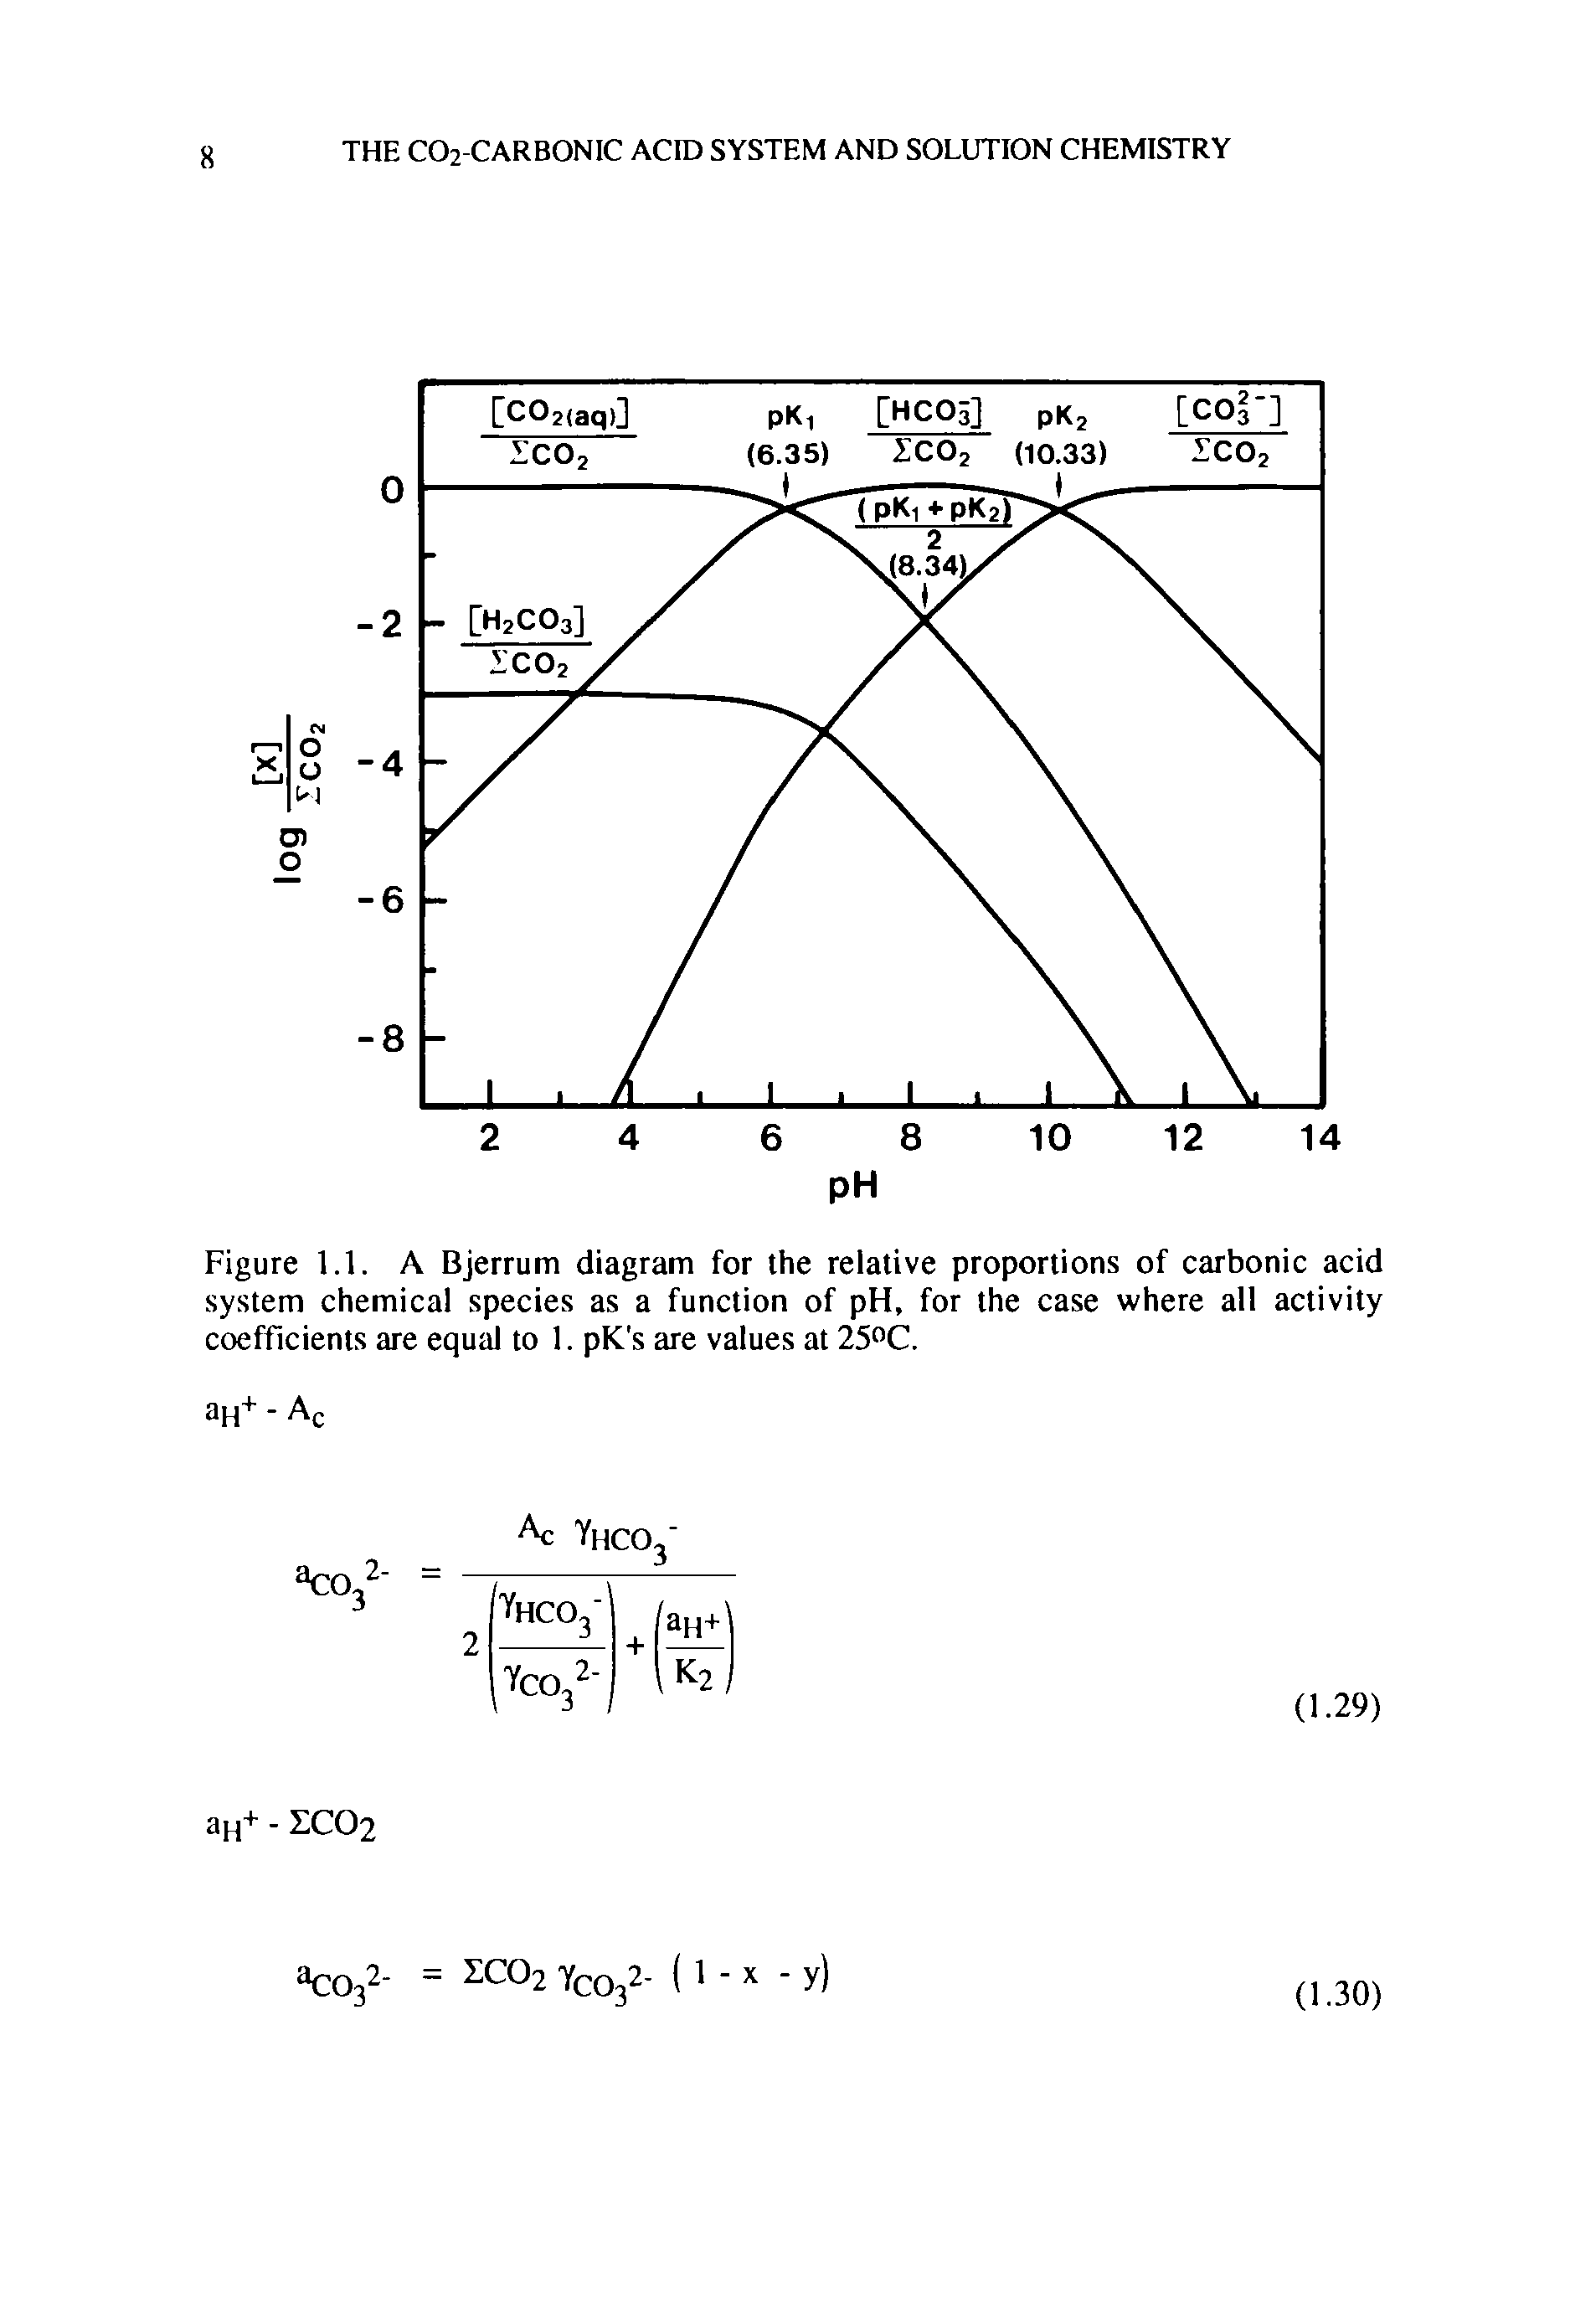 Figure 1.1. A Bjerrum diagram for the relative proportions of carbonic acid system chemical species as a function of pH, for the case where all activity coefficients are equal to 1. pK s are values at 25°C.